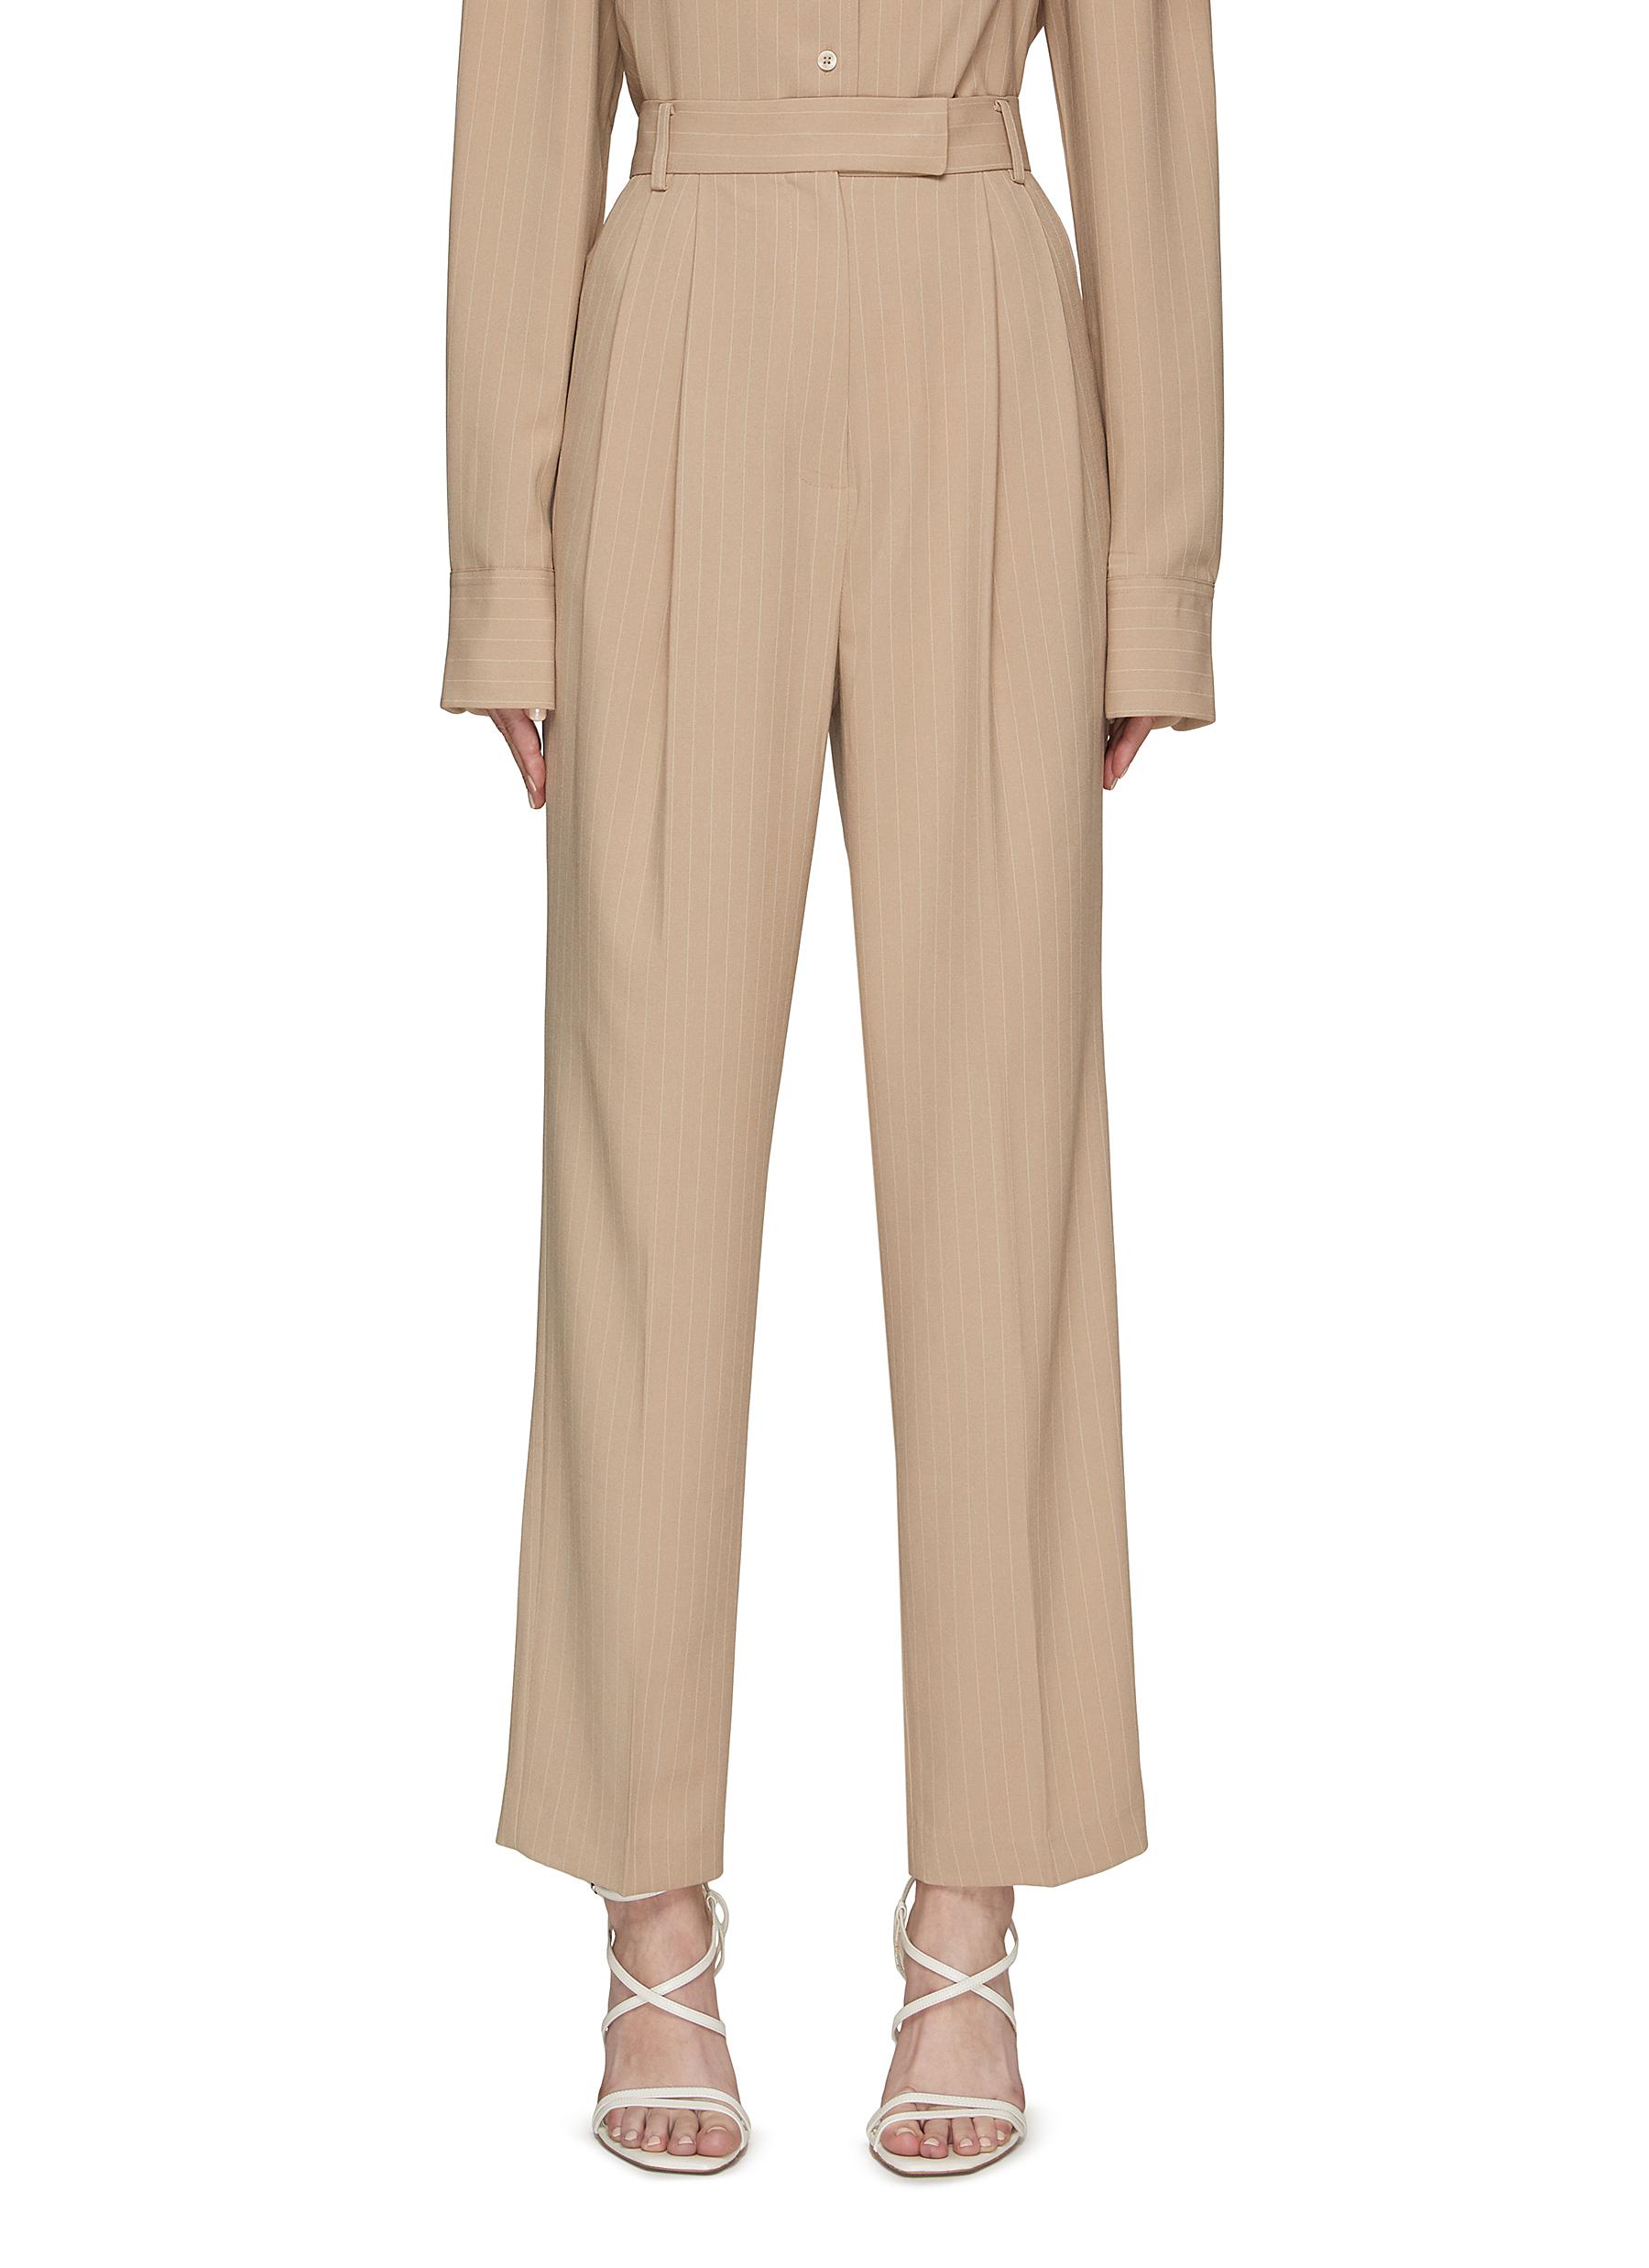 'Bea' Pleated Pinstripe High Waist Straight Suiting Pants